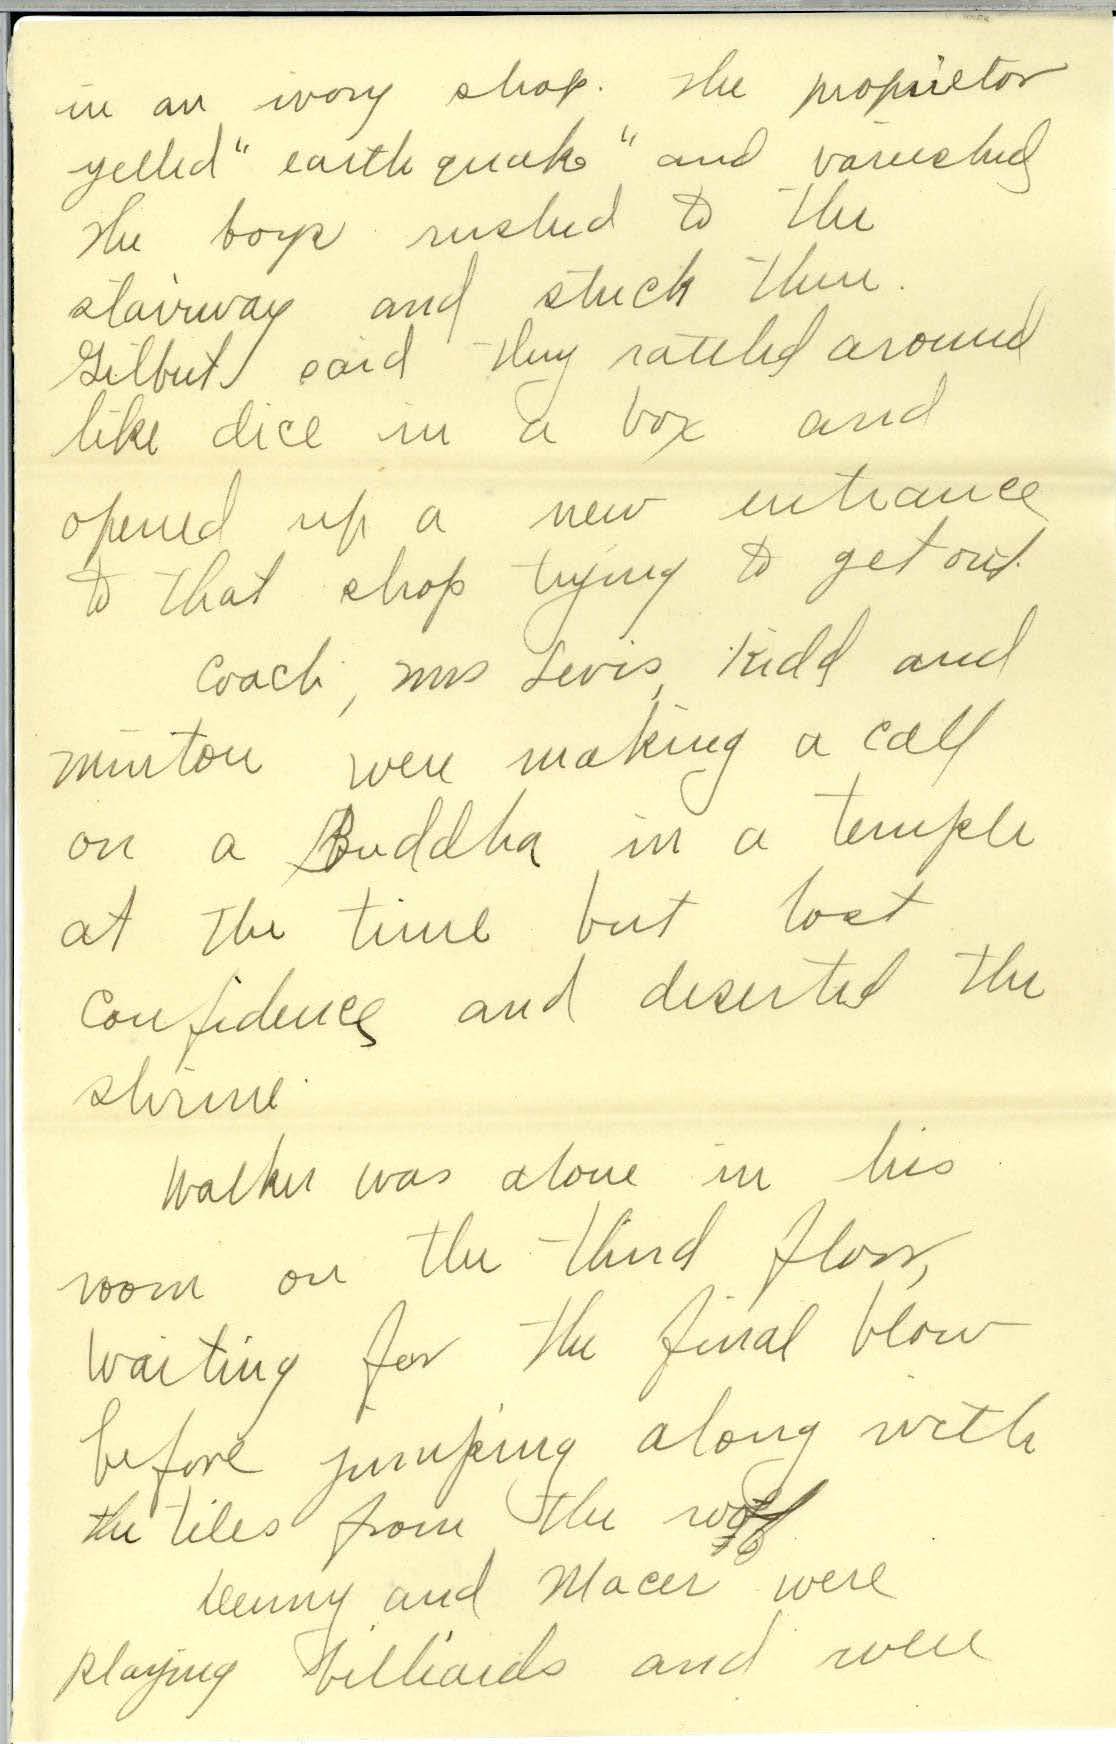 Scan of page 2 of Edna Hatfield's April 30, 1922 letter to Frank R. Elliot - written in cursive handwriting. 